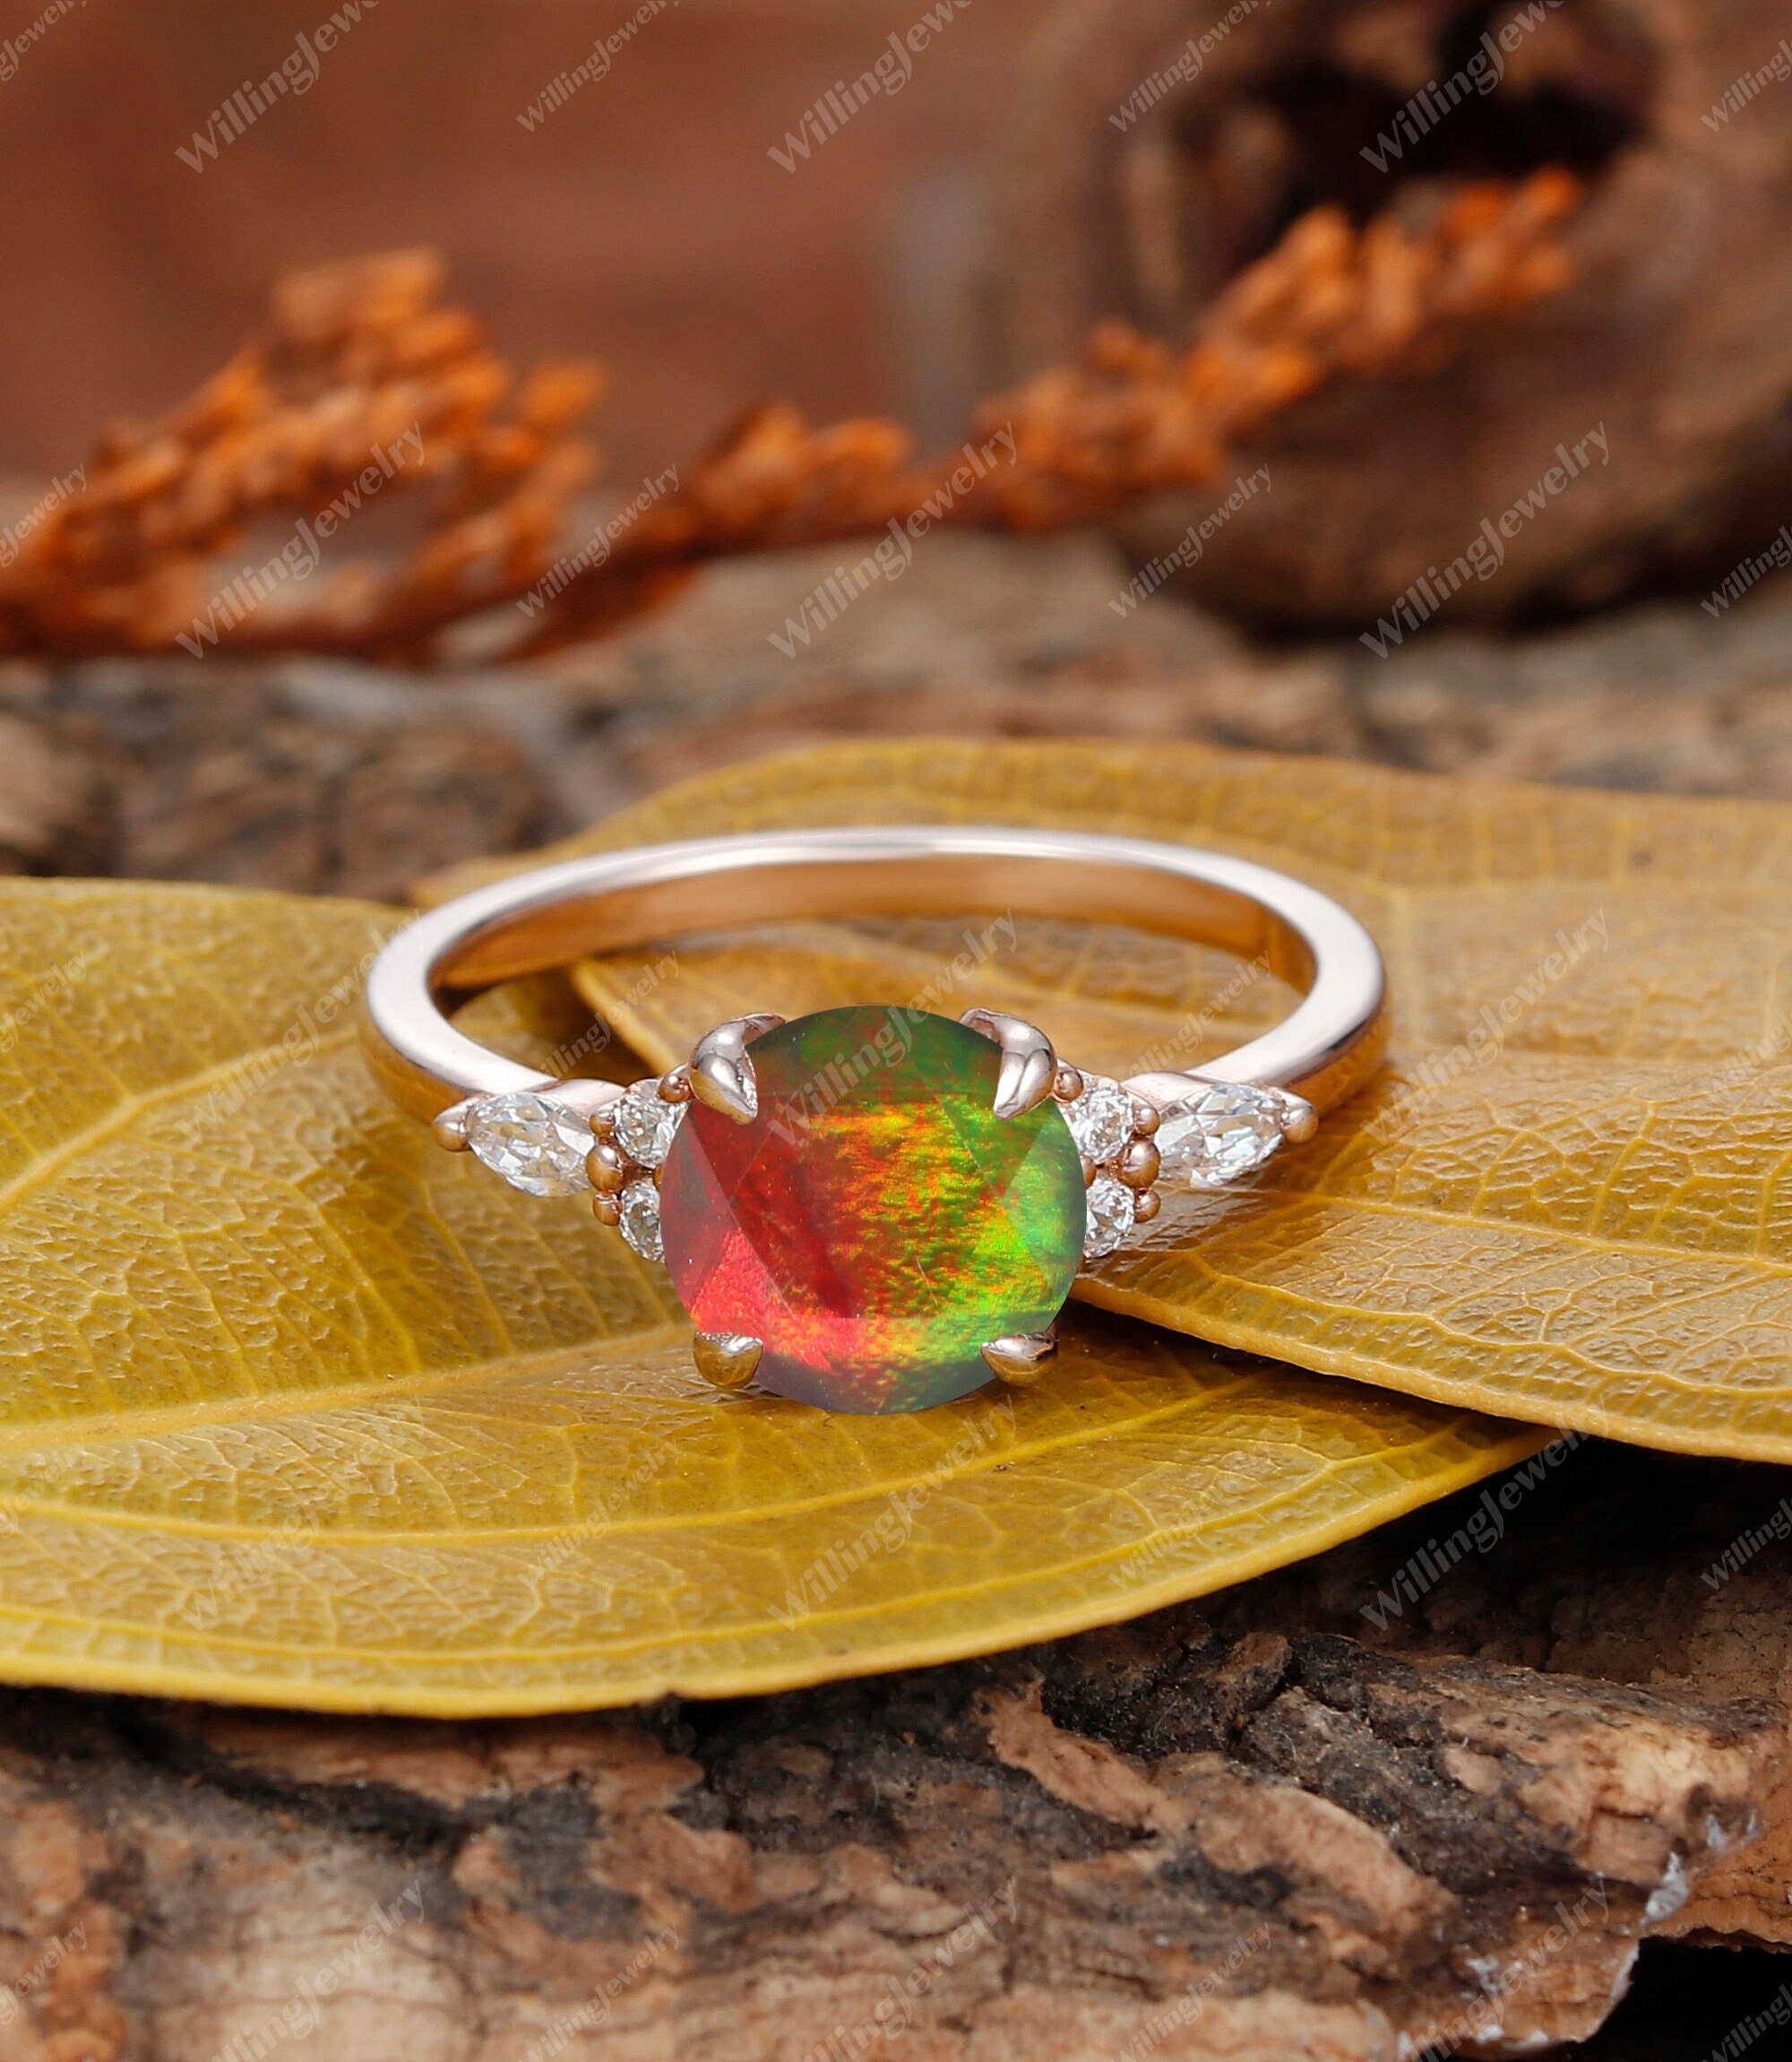 Unique Round Cut Natural Canada Ammolite Engagement Ring, 14K Rose Gold  Ammolite Promise Wedding Ring, Anniversary Ring Meaningful Gift - Etsy  Canada